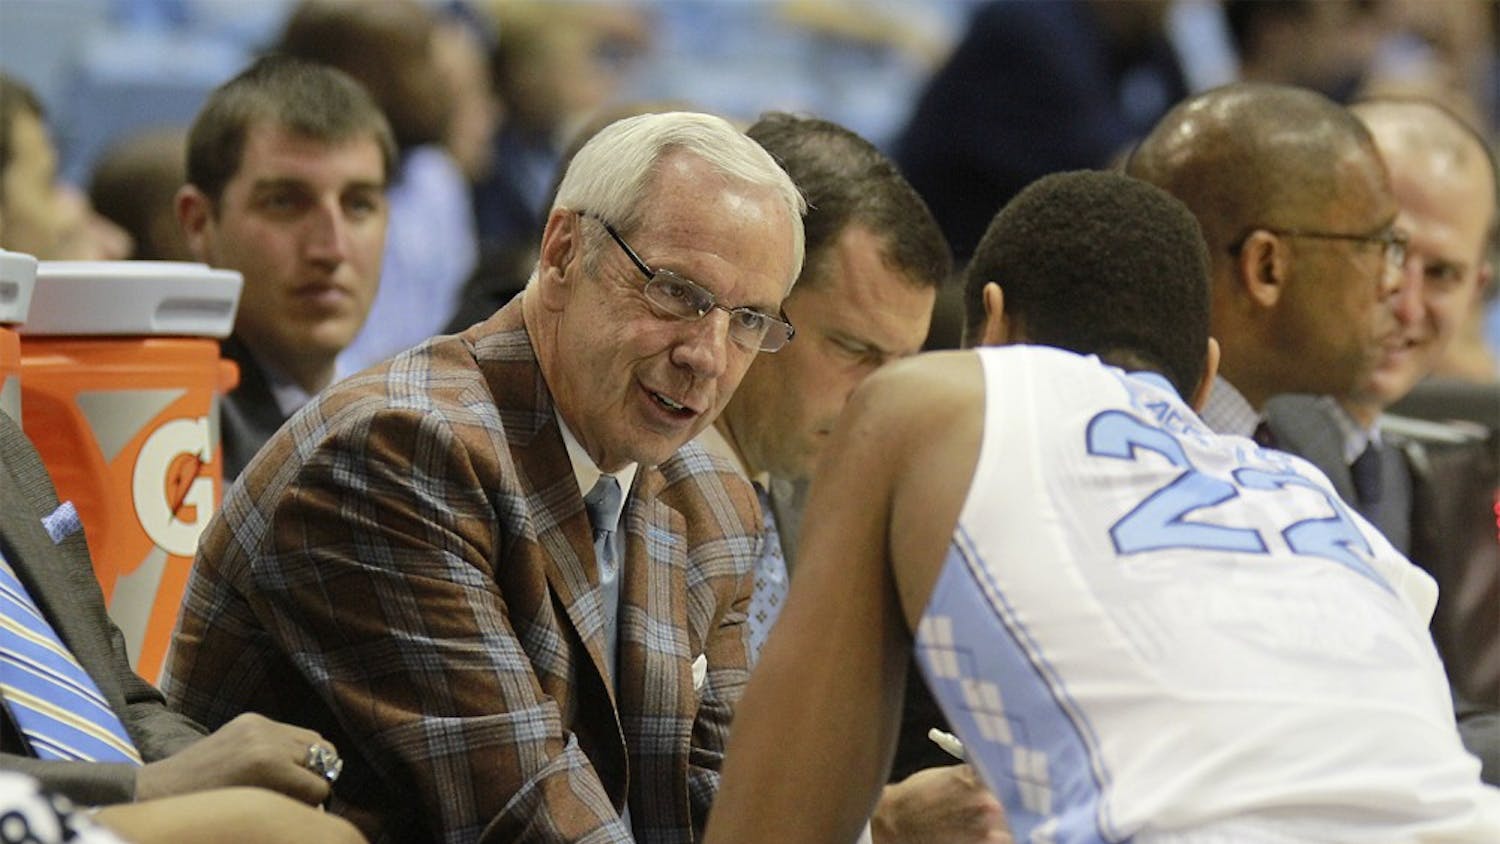 While attending the ACC men’s basketball media day on Wednesday, coach Roy Williams was peppered with Wainstein report questions.